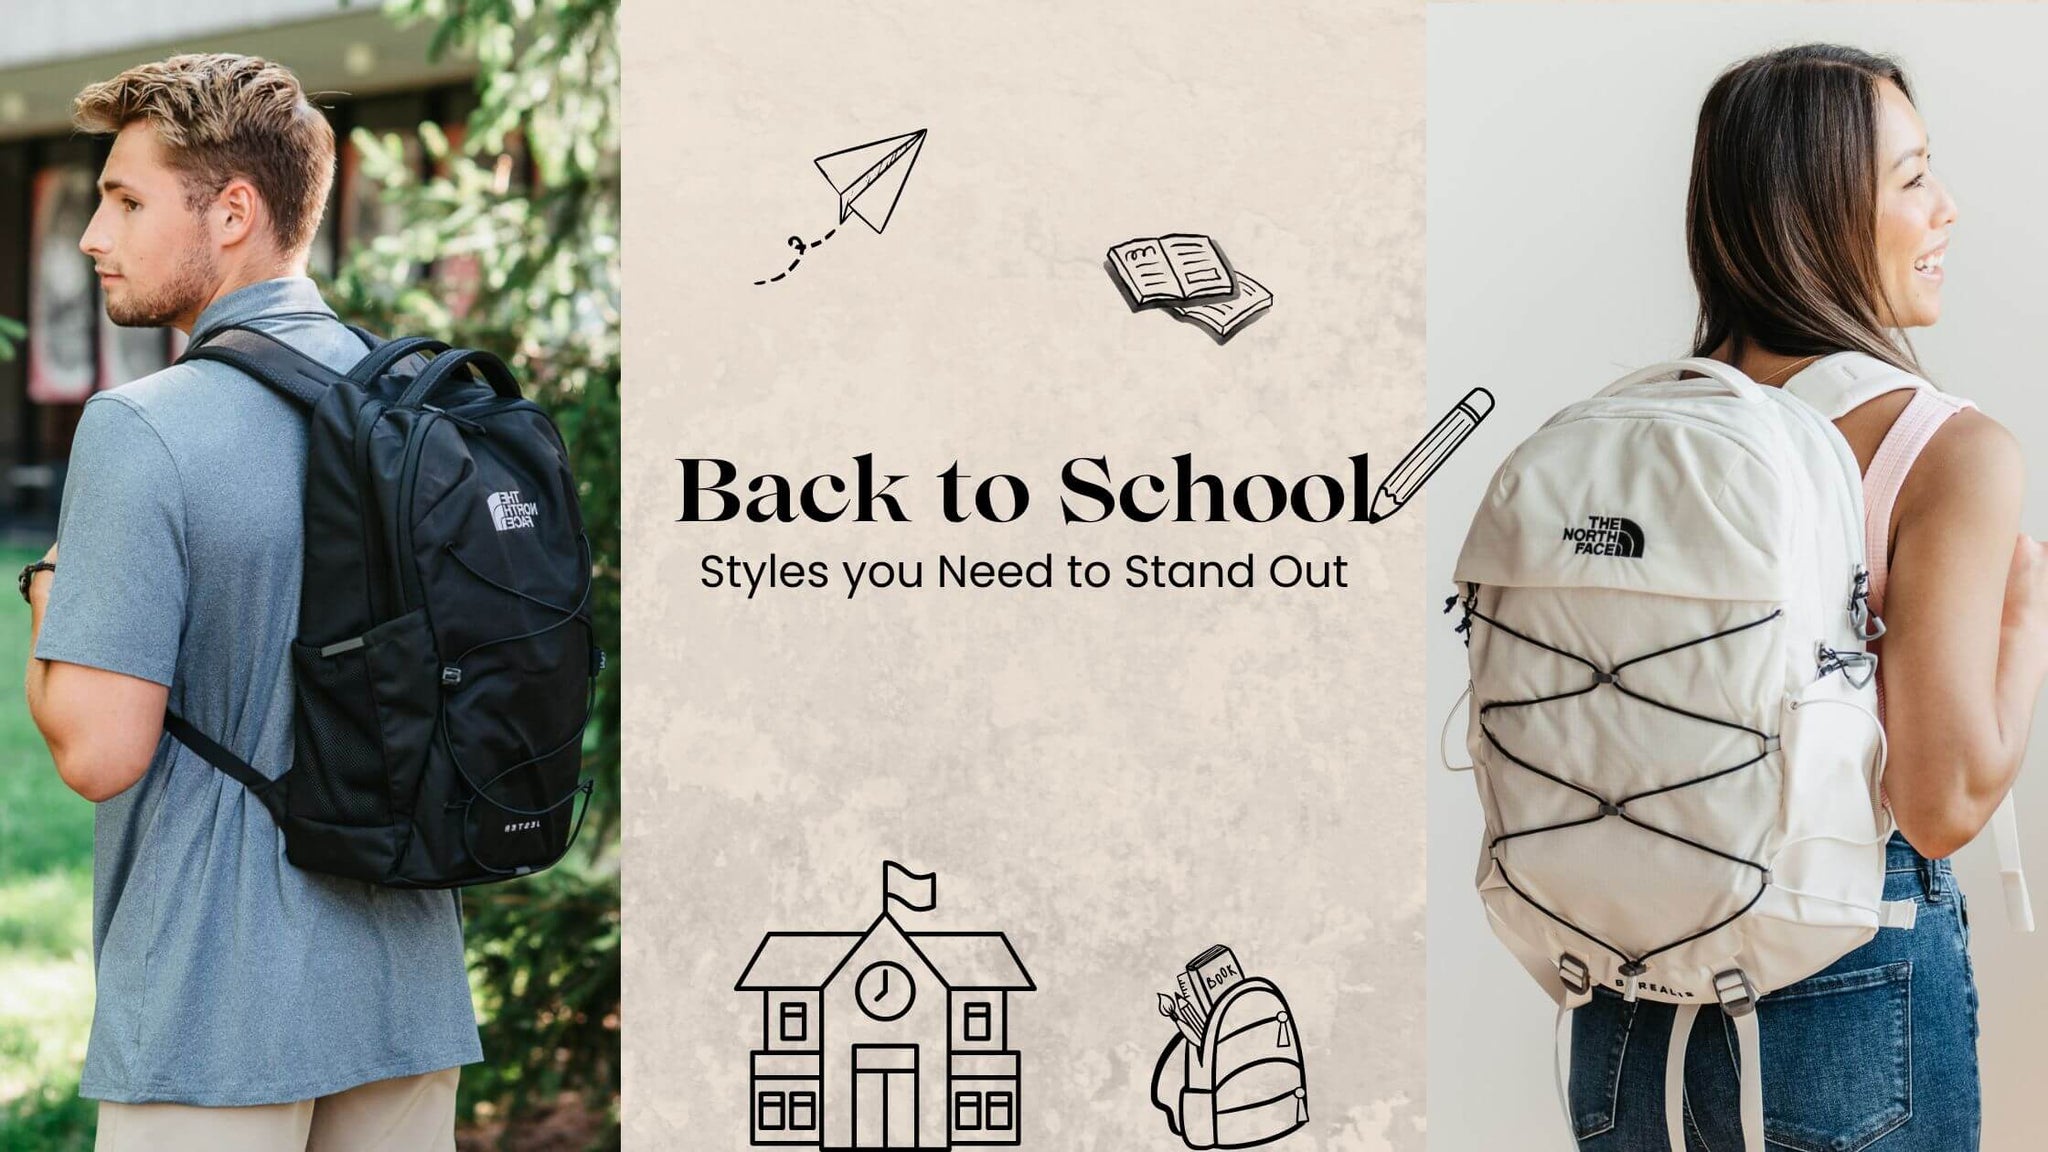 Back to School: Styles you Need to Stand Out